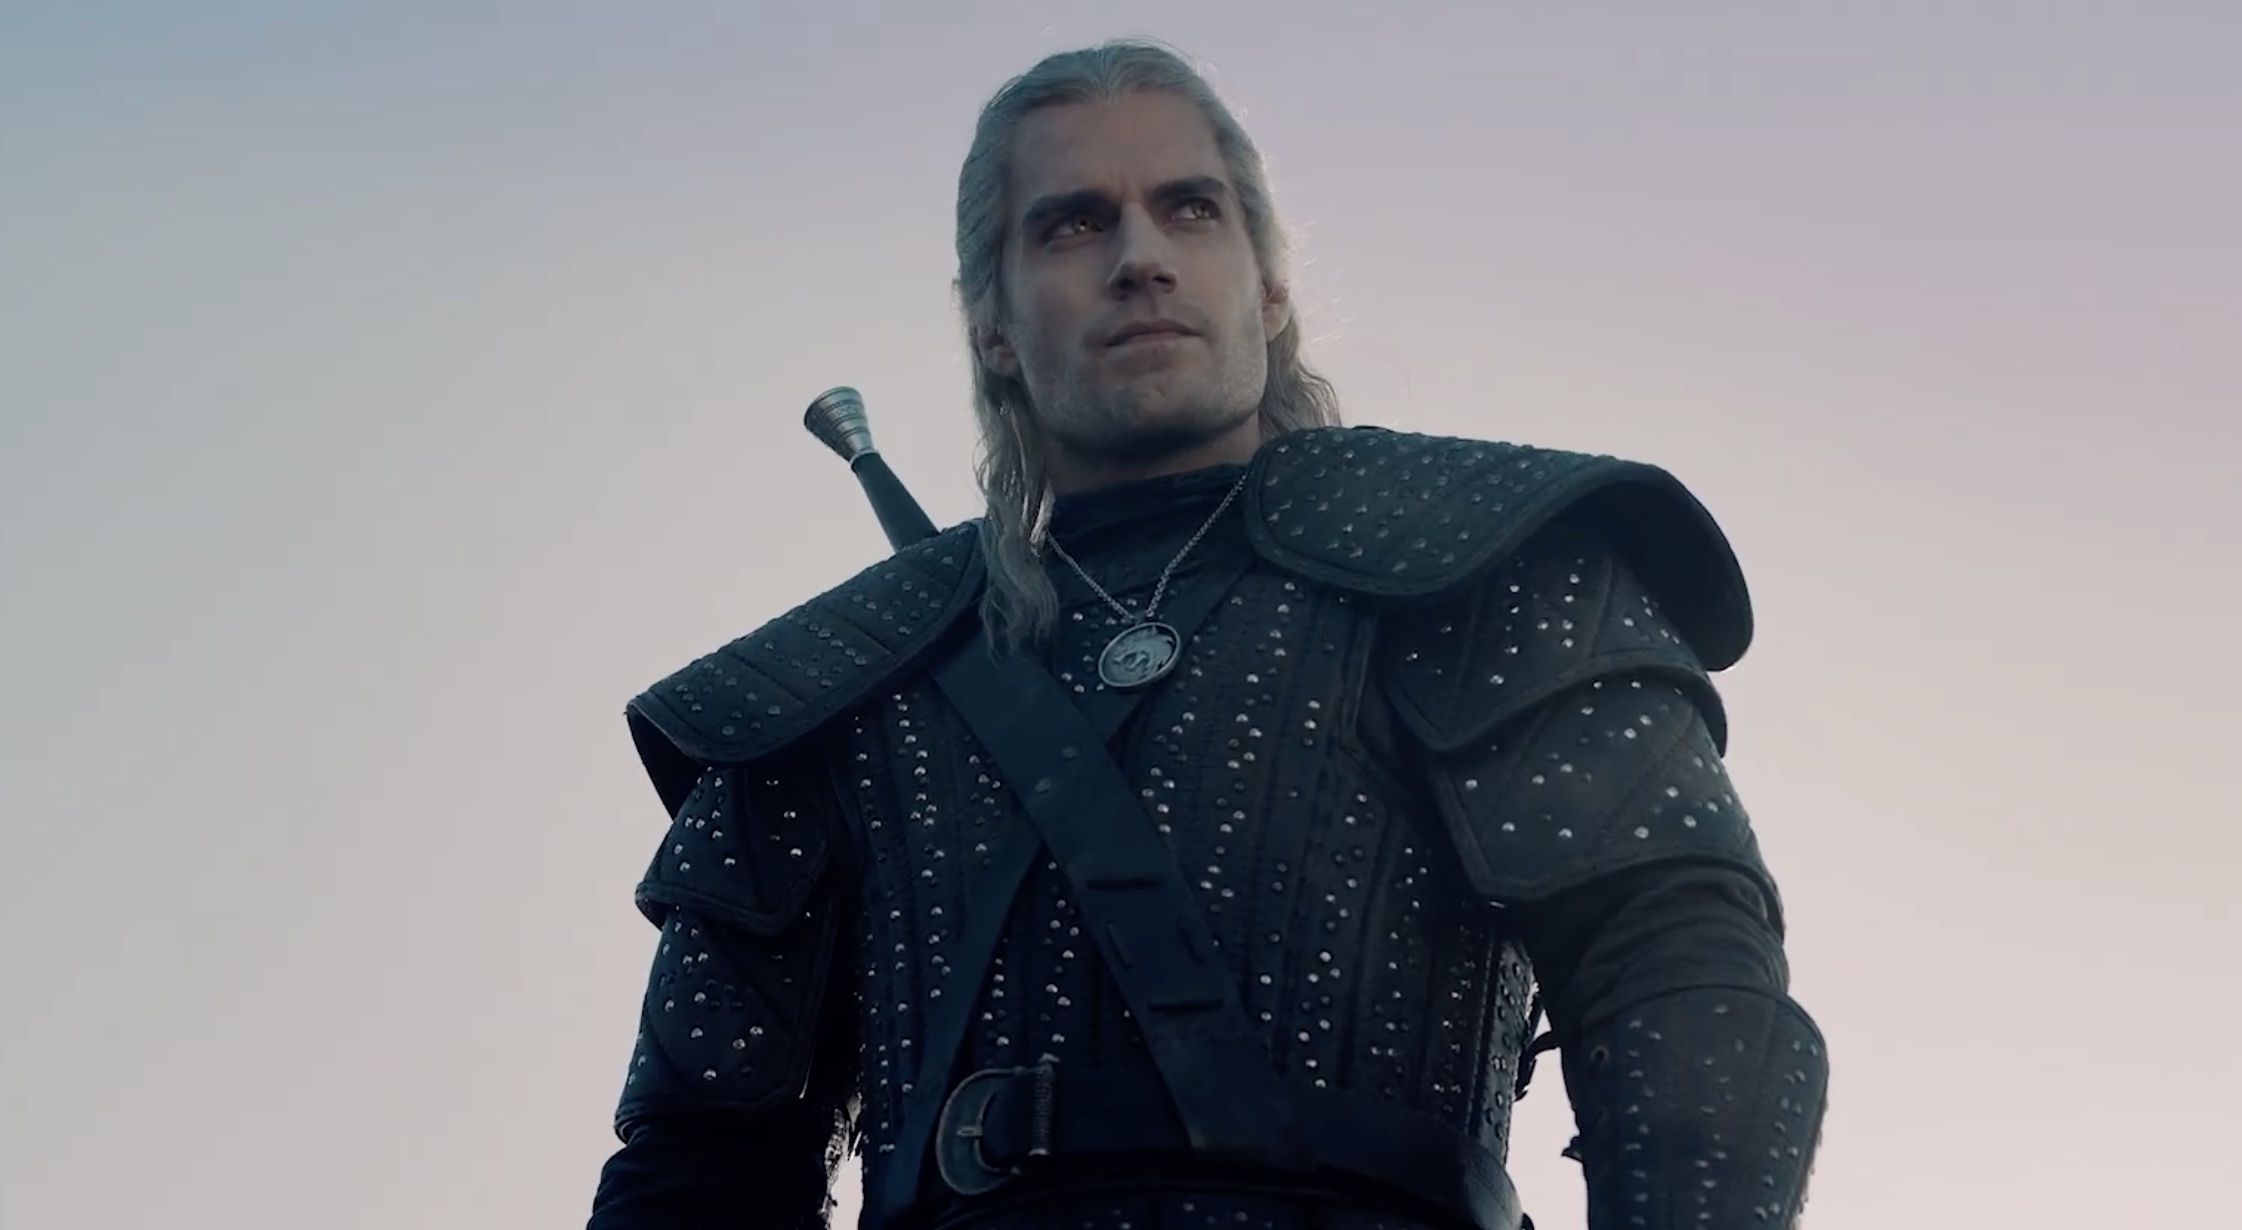 The Witcher season 2 footage confirms Henry Cavill will continue to slay ... monsters